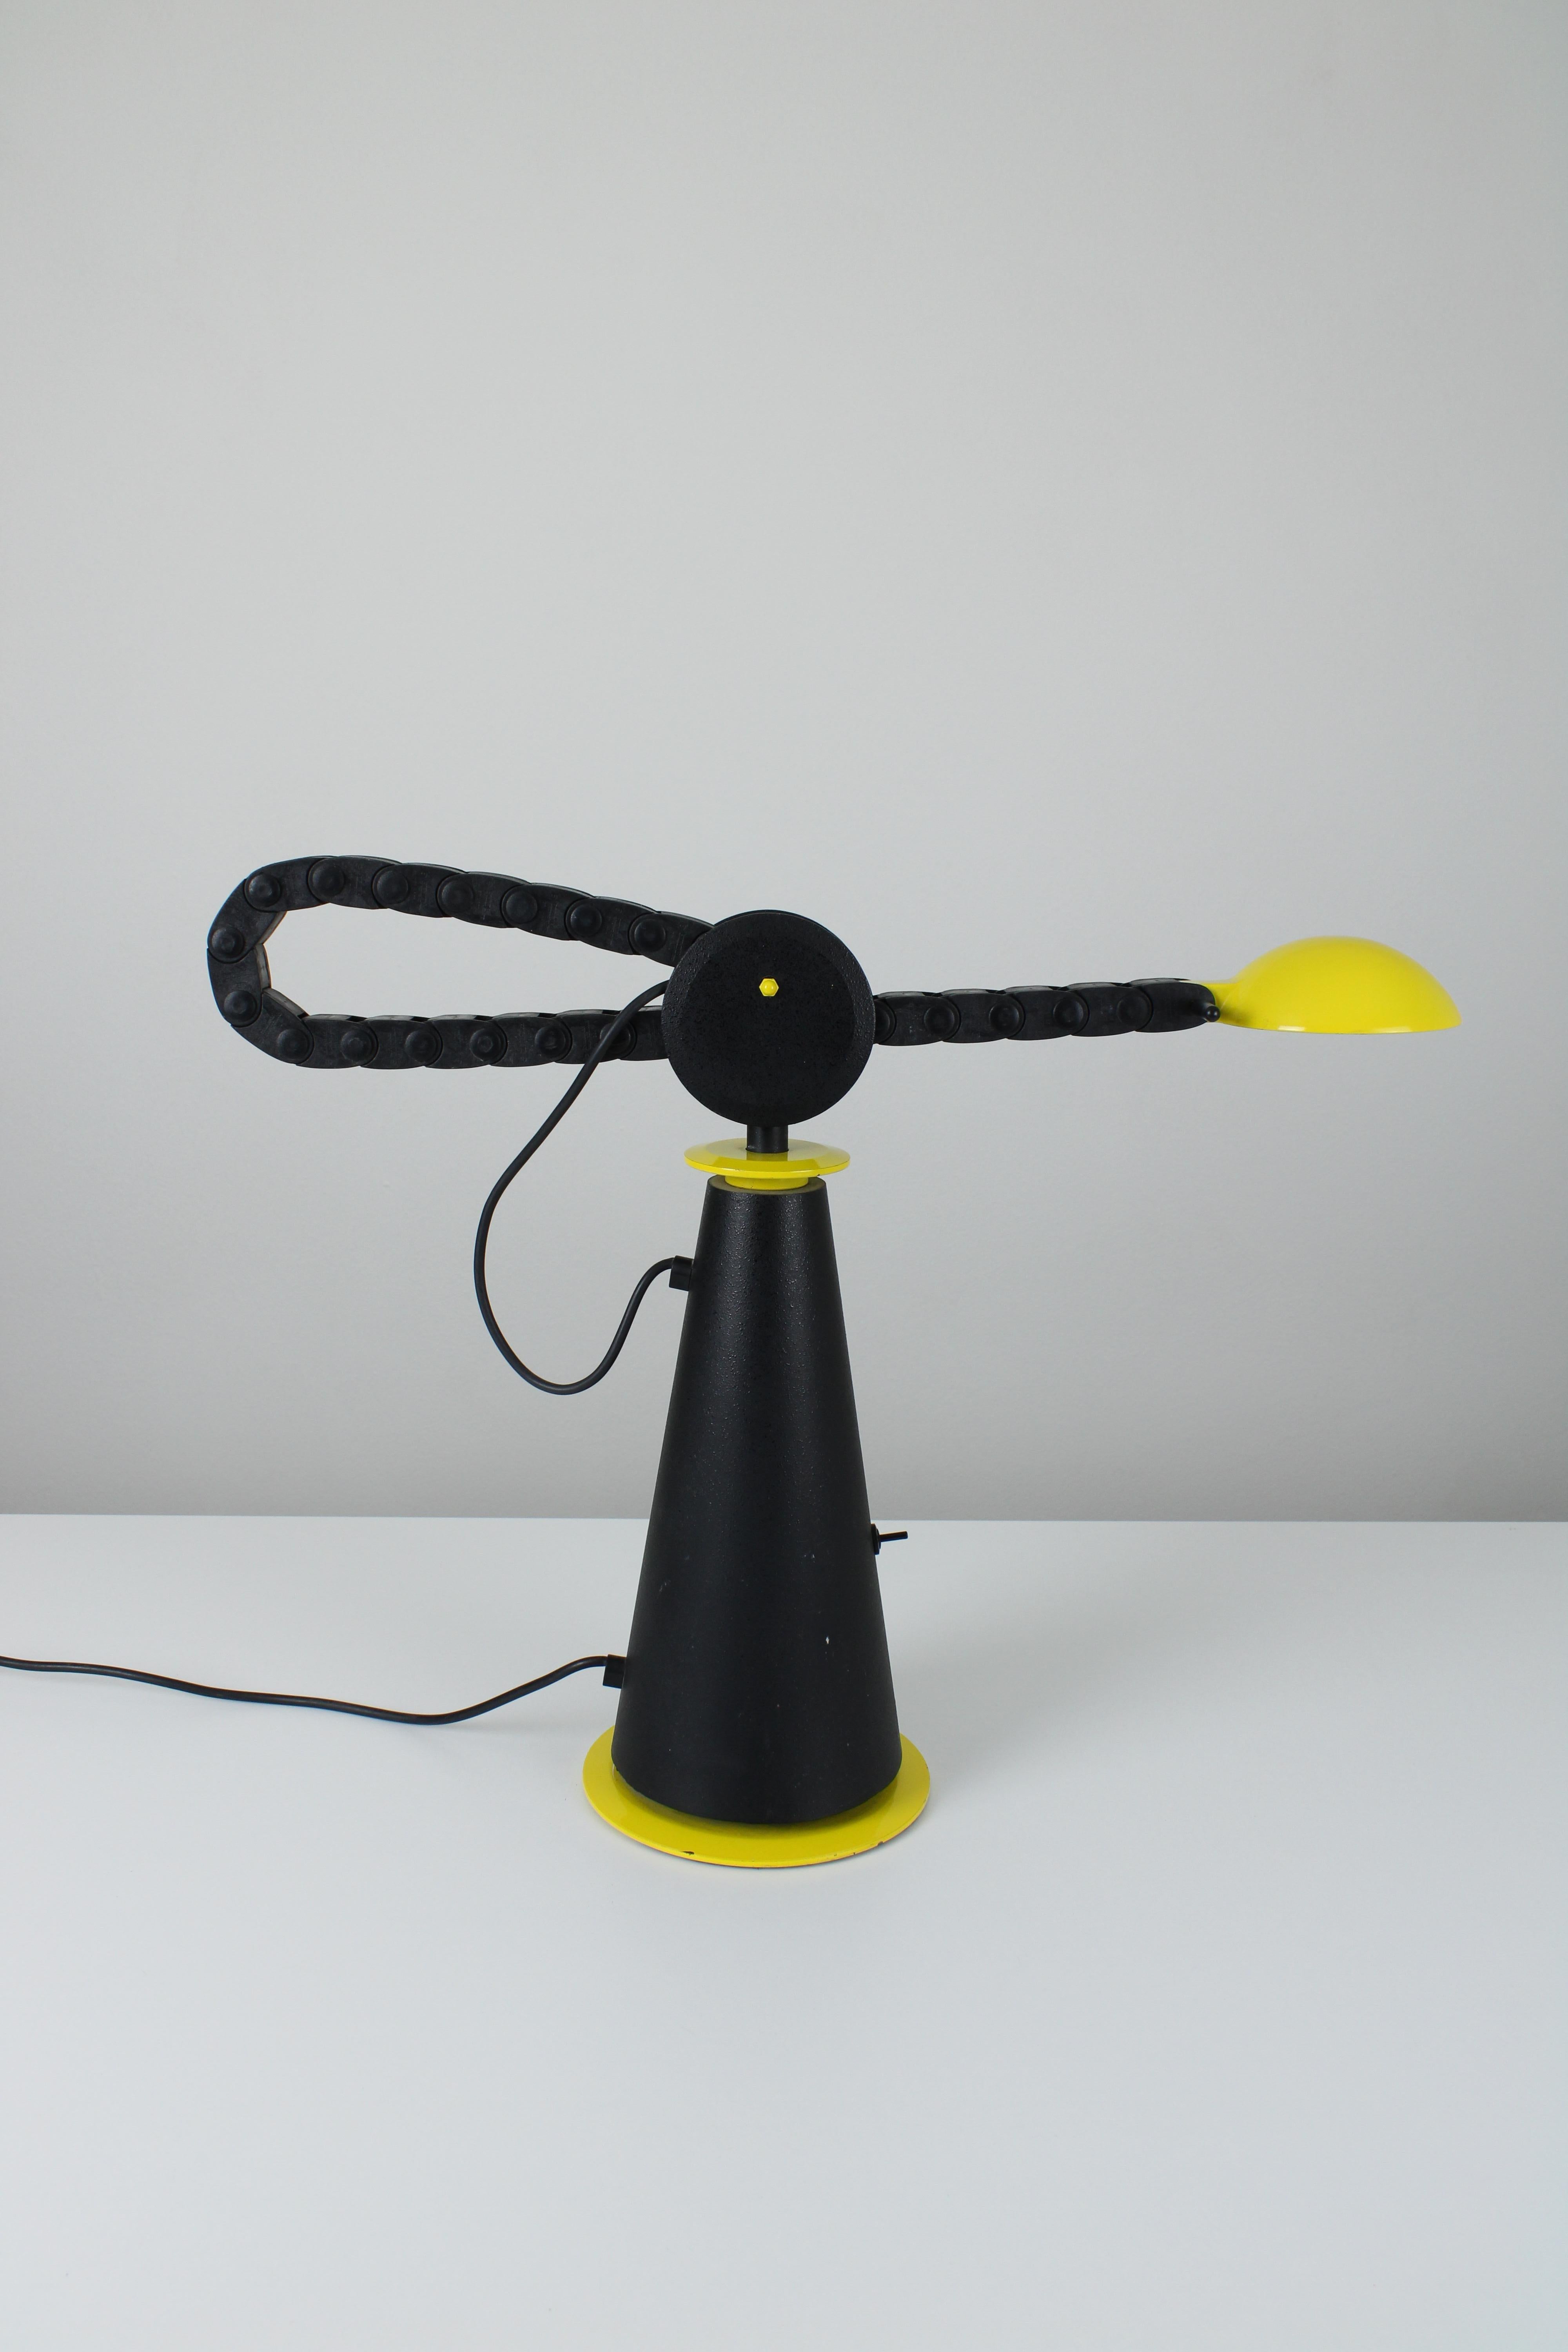 Table lamp, model Gaucho. Designed by Studio PER for Egoluce in 1982.
This lamp is made of a heavy steel base that holds a bicycle chain like adjustable arm. That makes it possible to easily extend the arm horizontally. On the base is a light